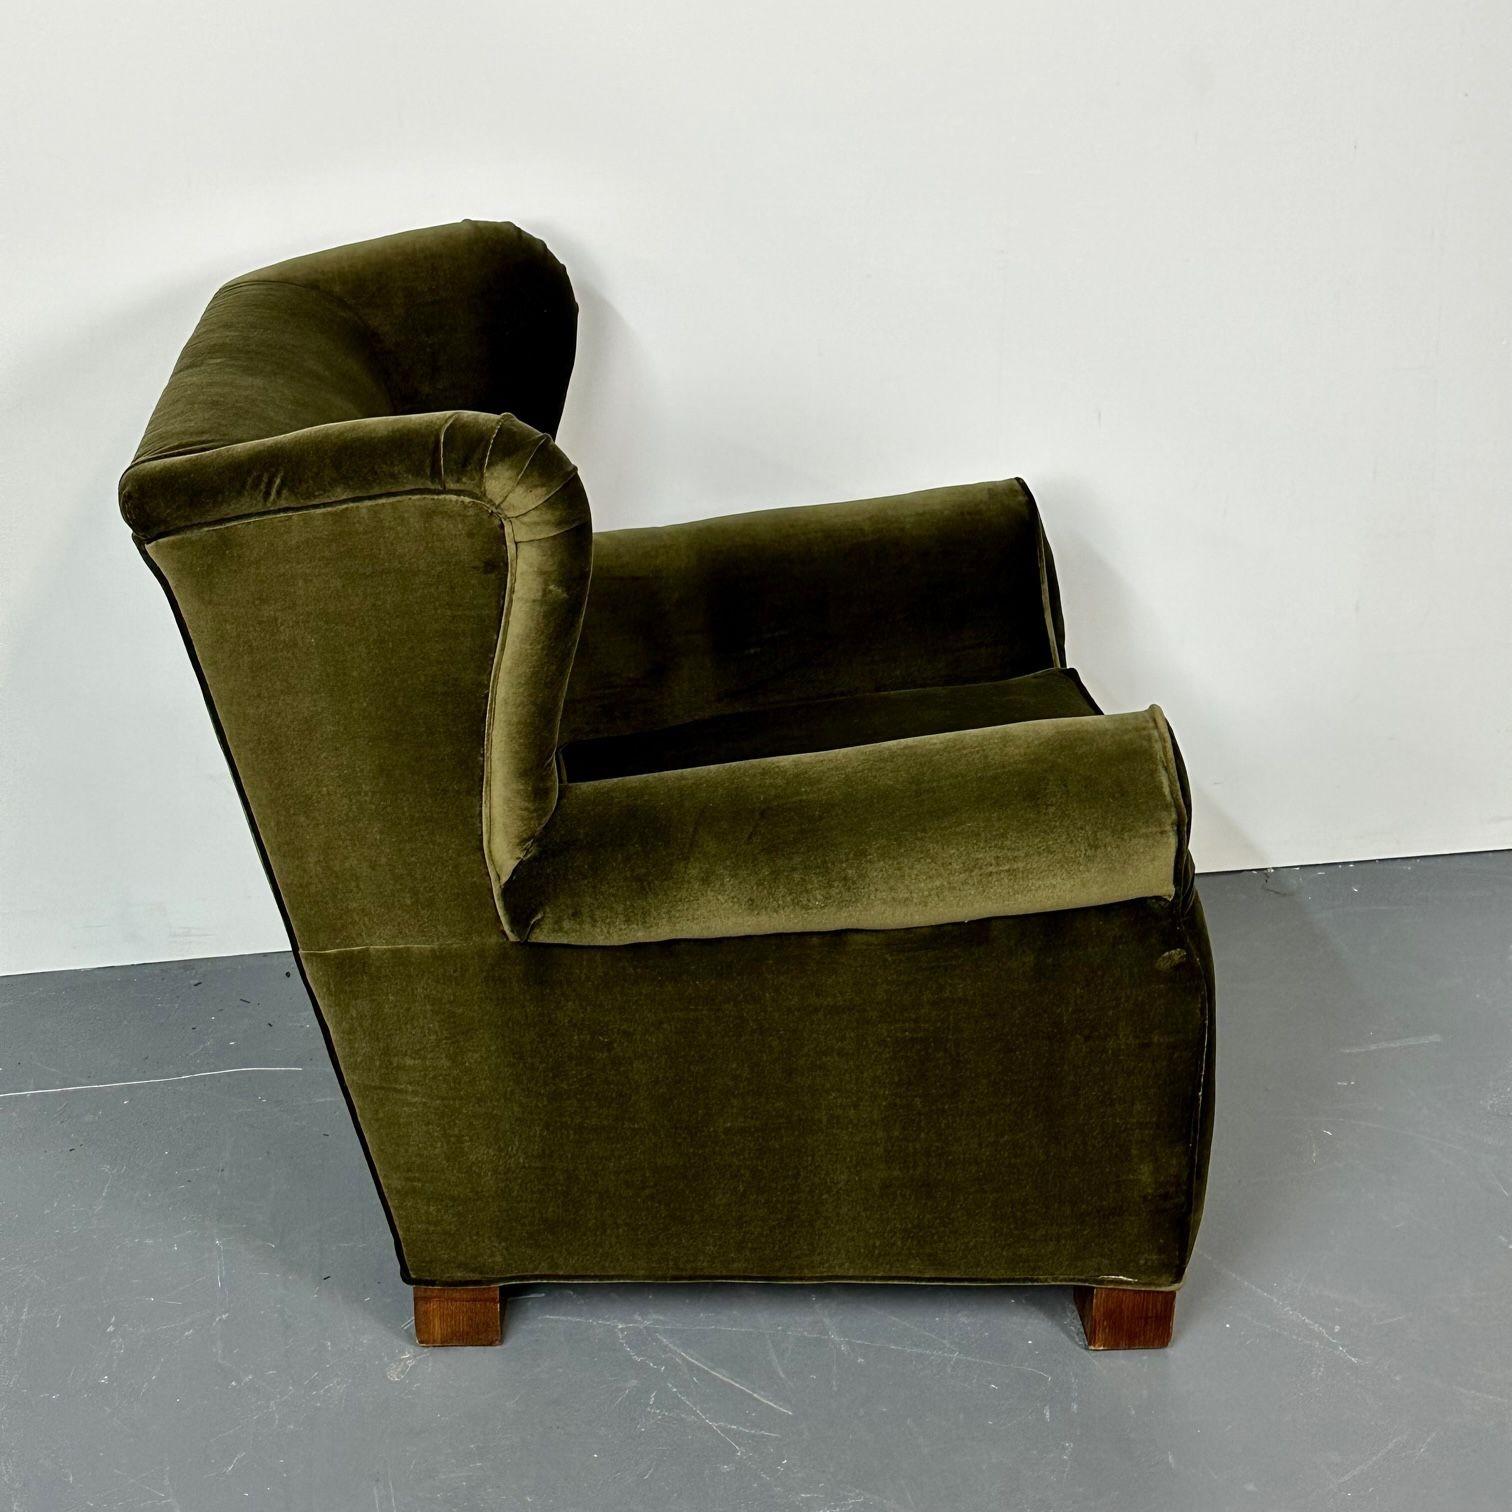 Mid-20th Century Danish Cabinetmaker Wingback / Lounge Chair, Scroll Arm, Fritz Hansen Style For Sale